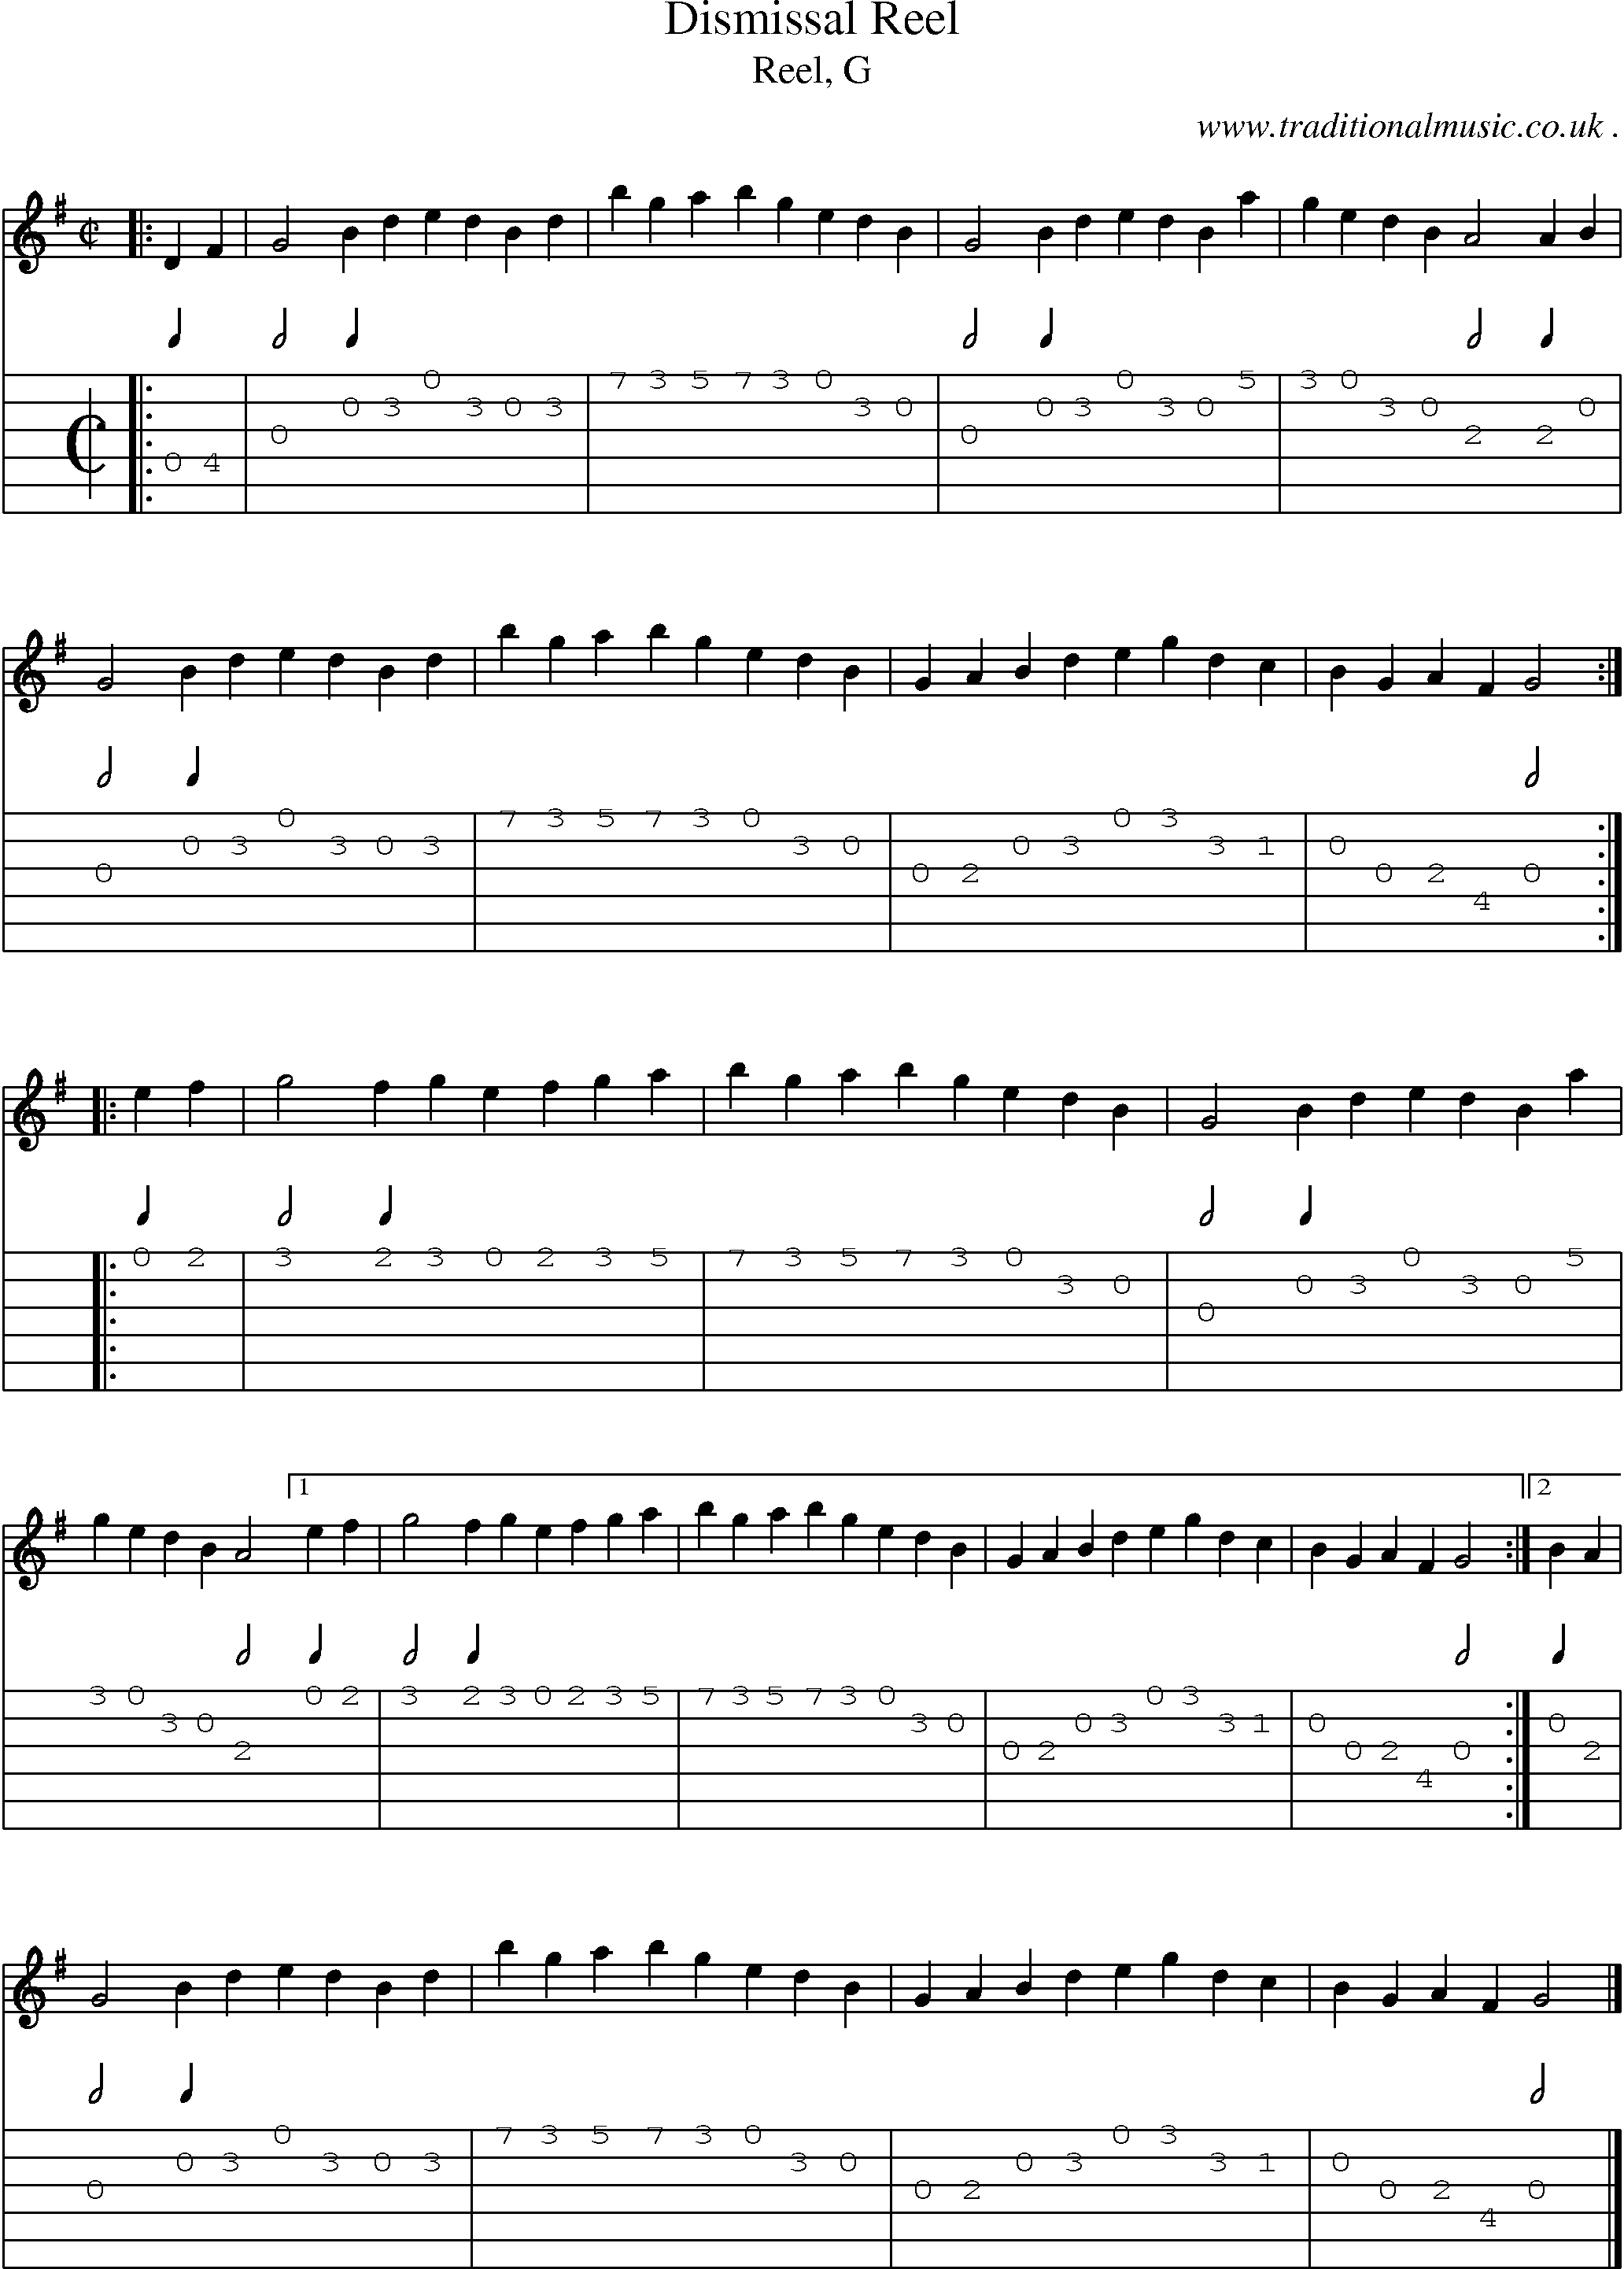 Sheet-music  score, Chords and Guitar Tabs for Dismissal Reel